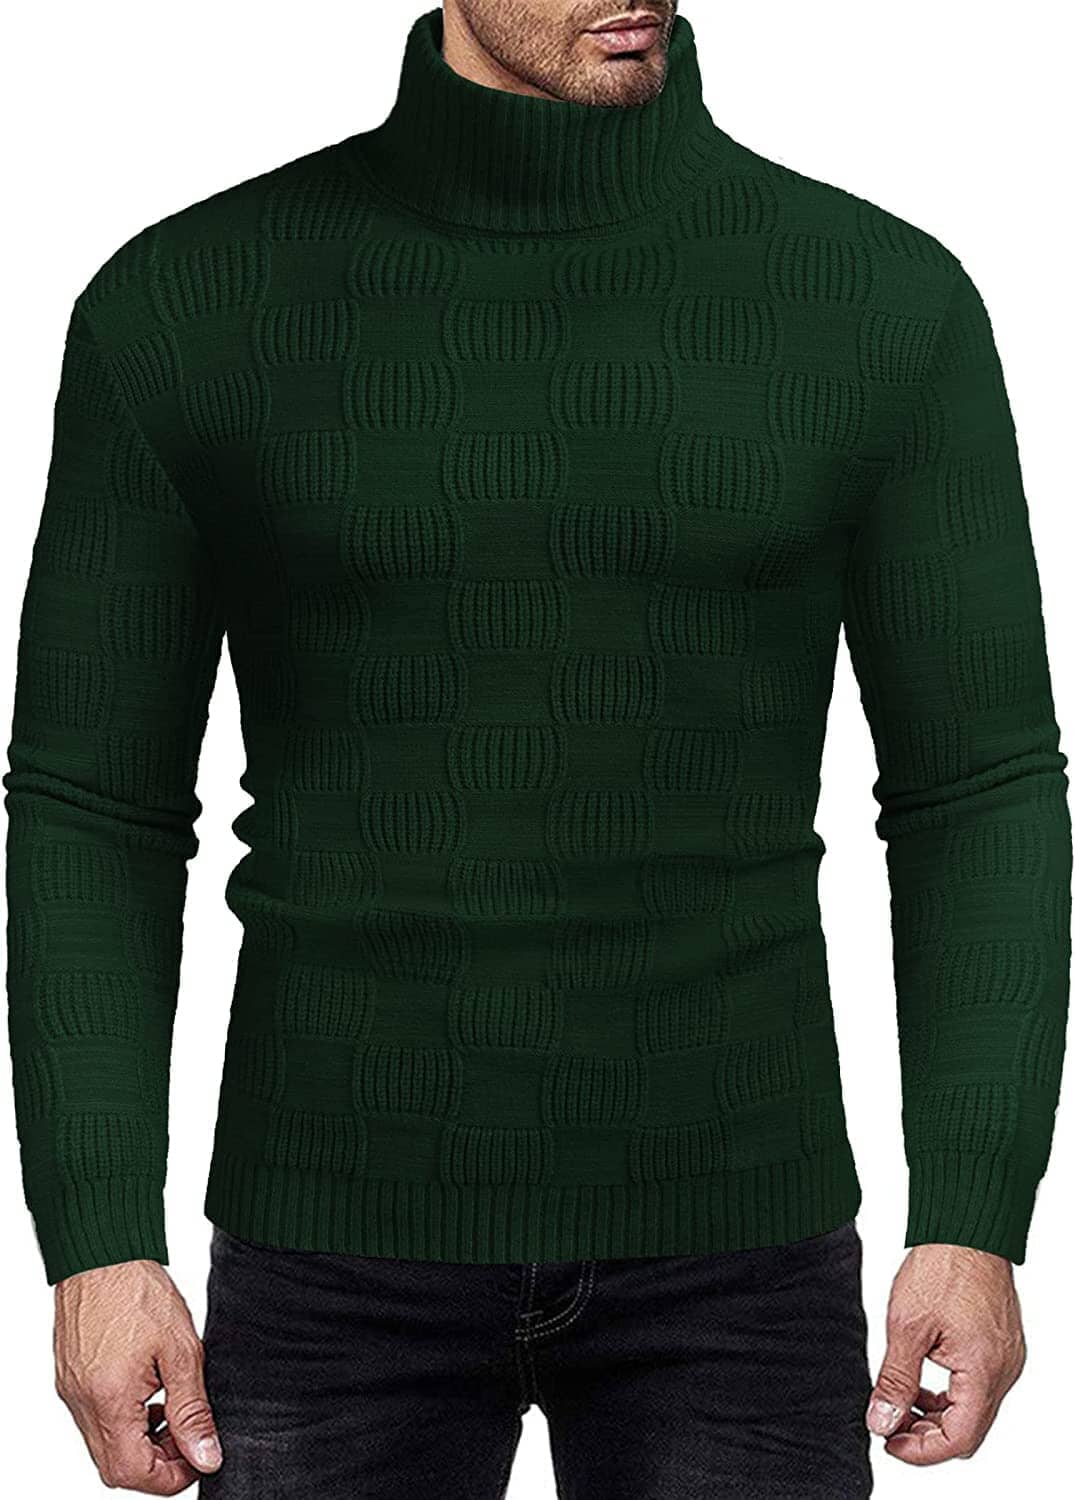 Men's Knitted Turtleneck Sweater Plaid Hightneck Long Sleeve Sweater (US Only) Sweaters COOFANDY Store Green S 